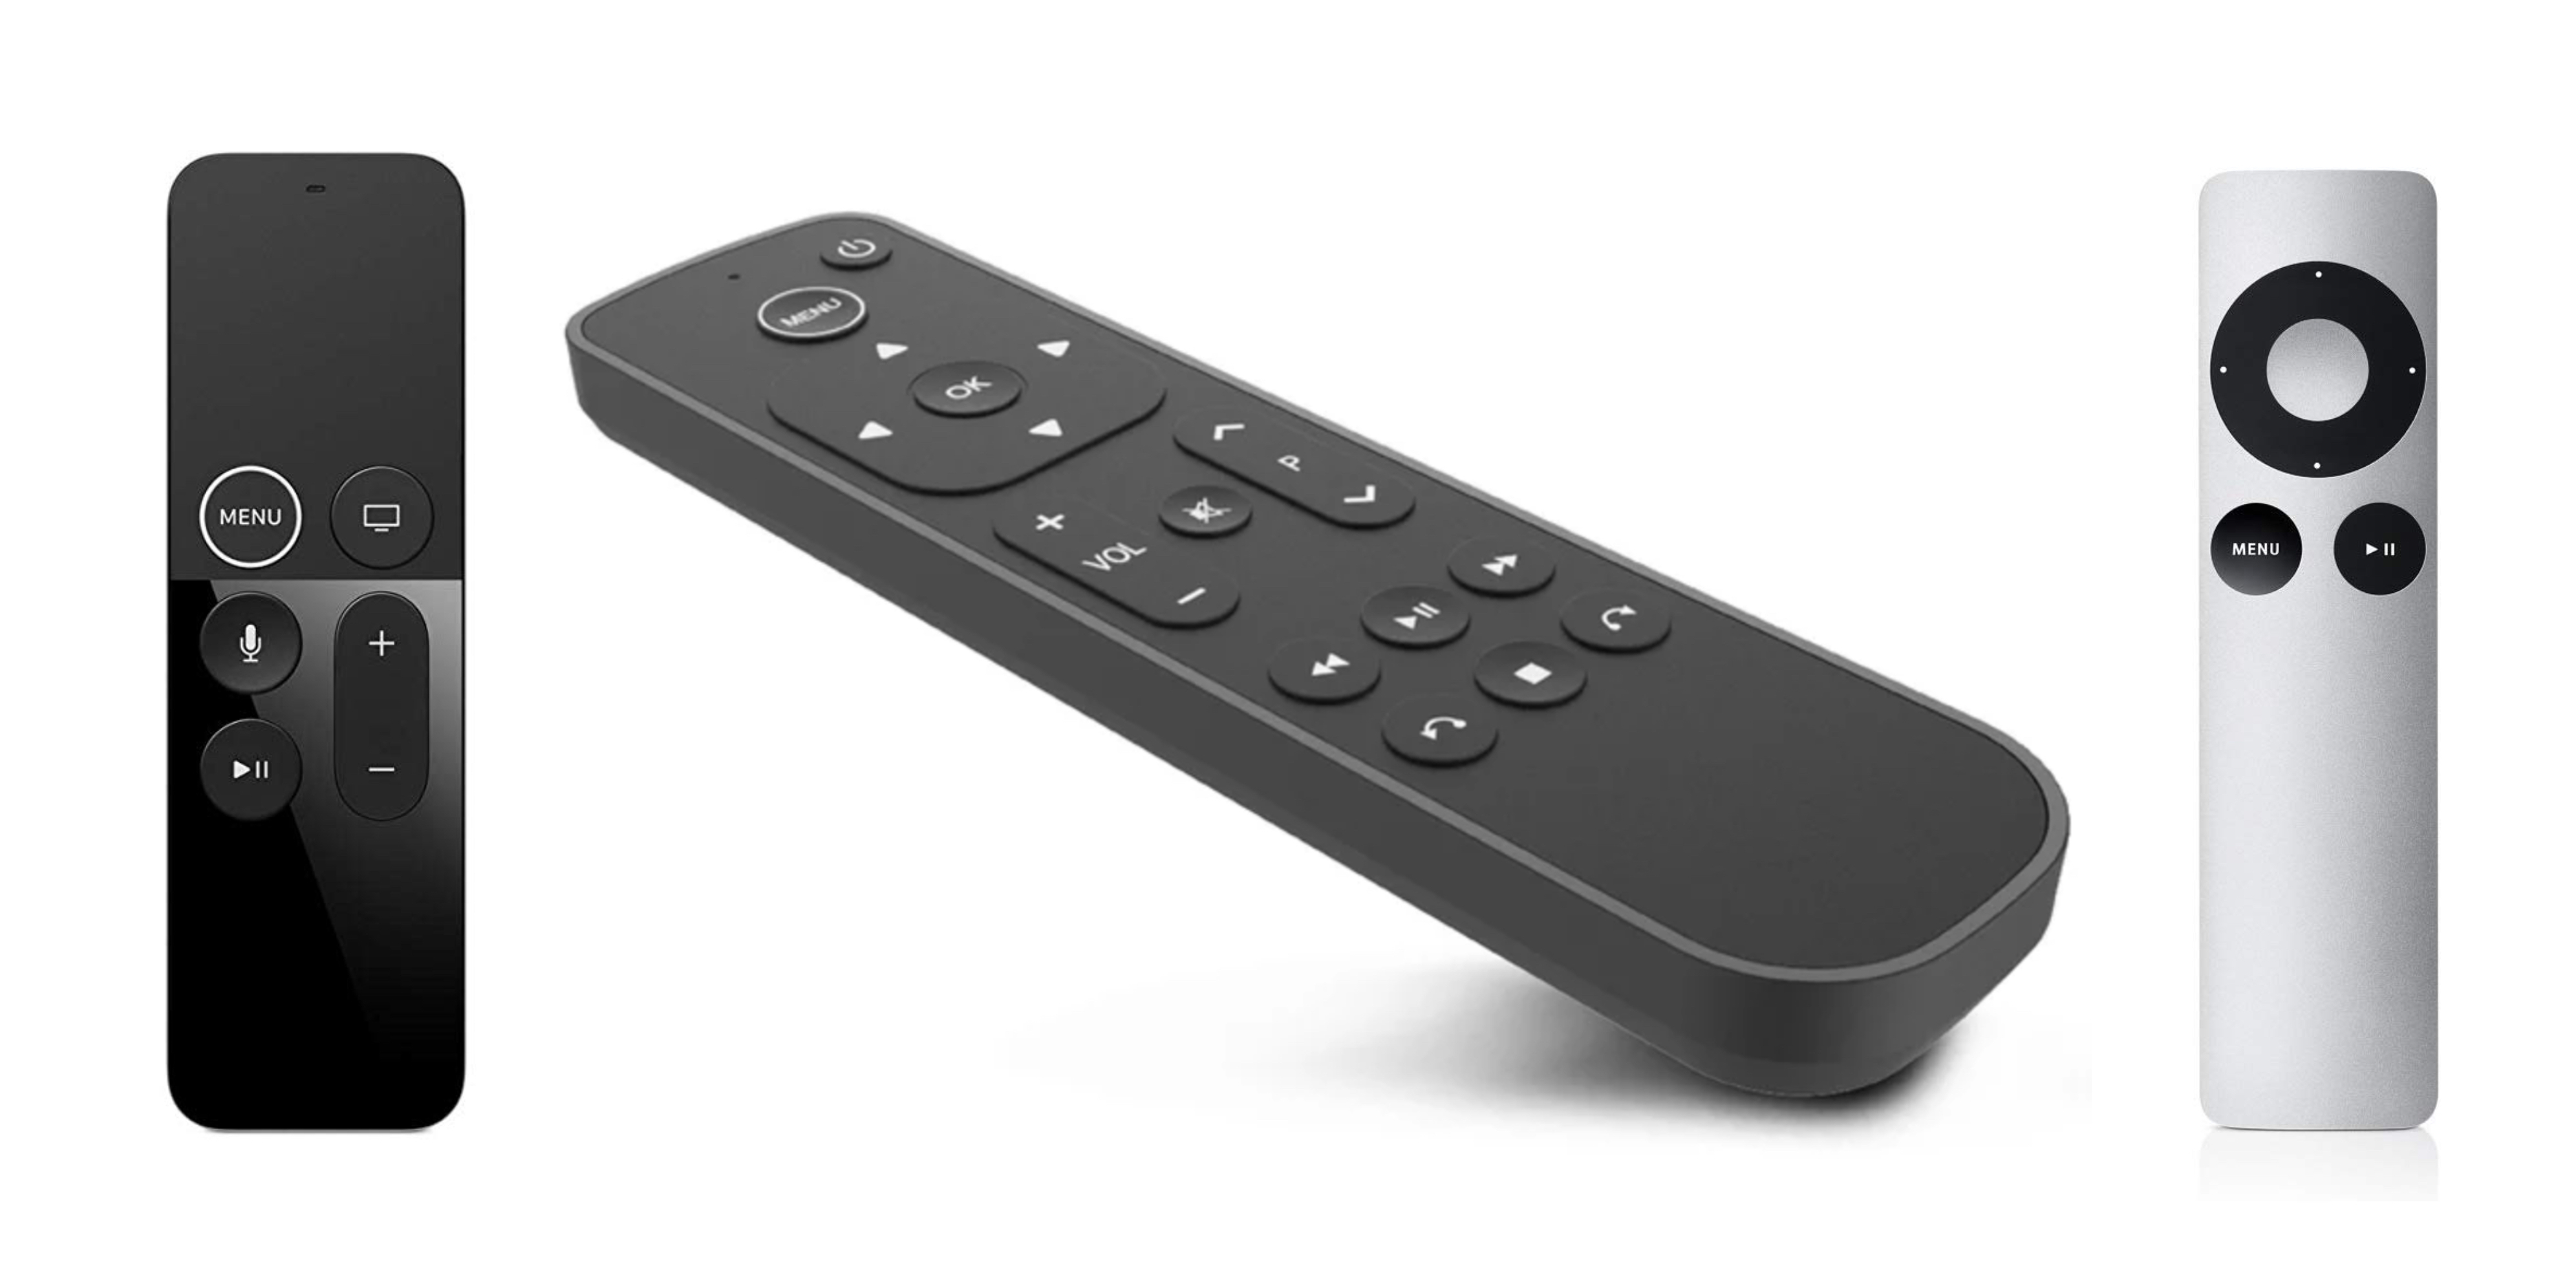 Swiss cable company offering remote to control TV, like Apple's own IR - 9to5Mac